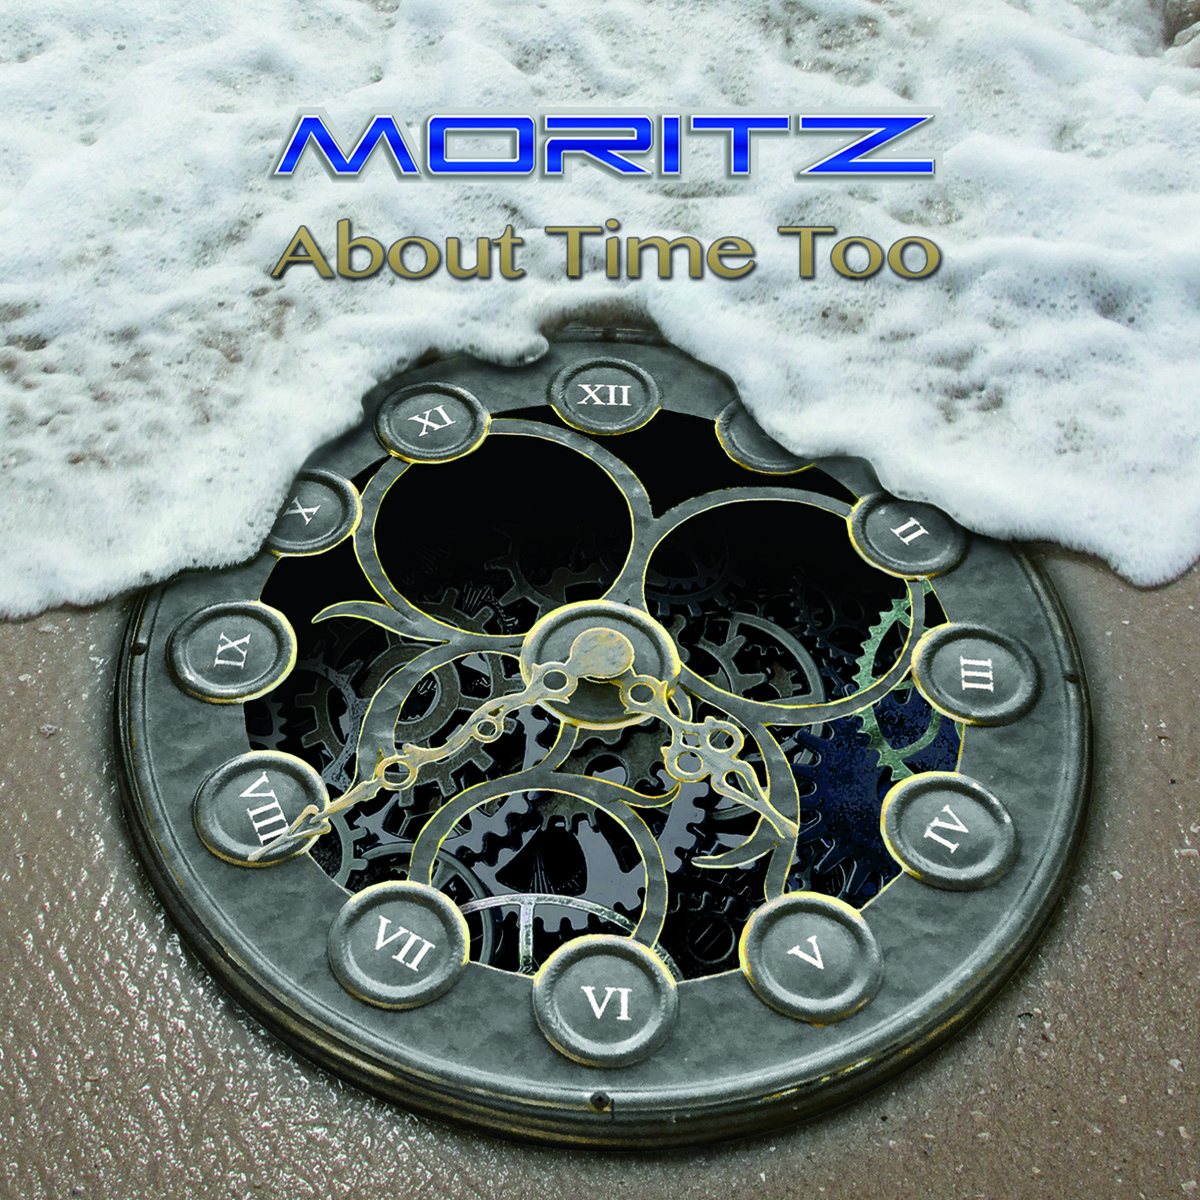 MORITZ (UK) – About Time Too